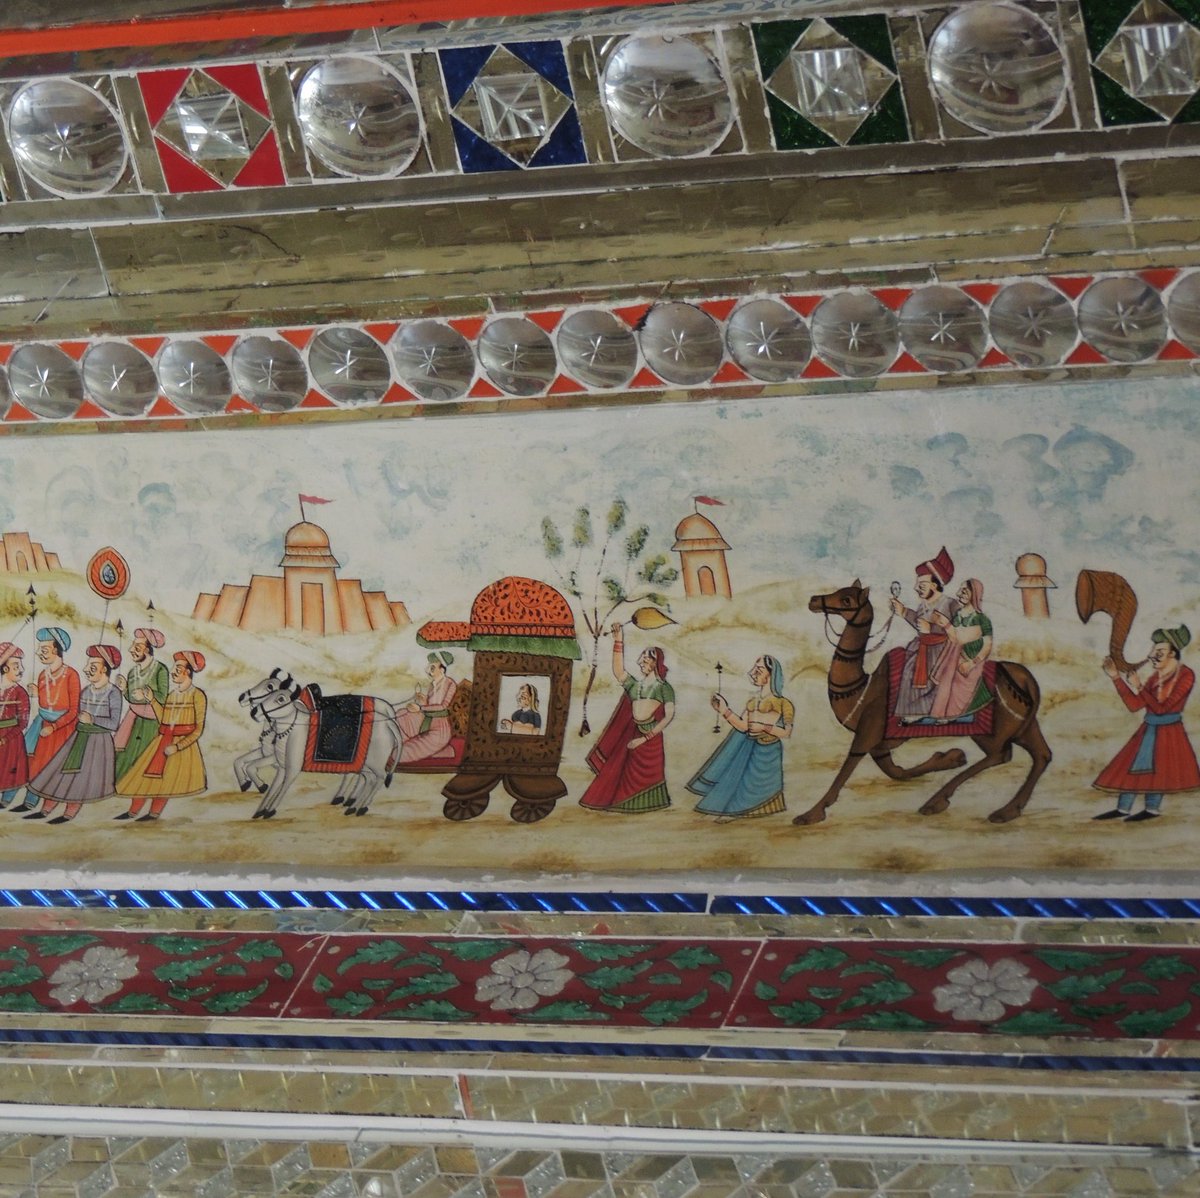 ऊ is for ऊंंट. Pic 6 is from one of the grand Havelis of Jaisalmer (19th century) where the camel is part of a procession painted on the wall.  #AksharArt  #ArtByTheLetter